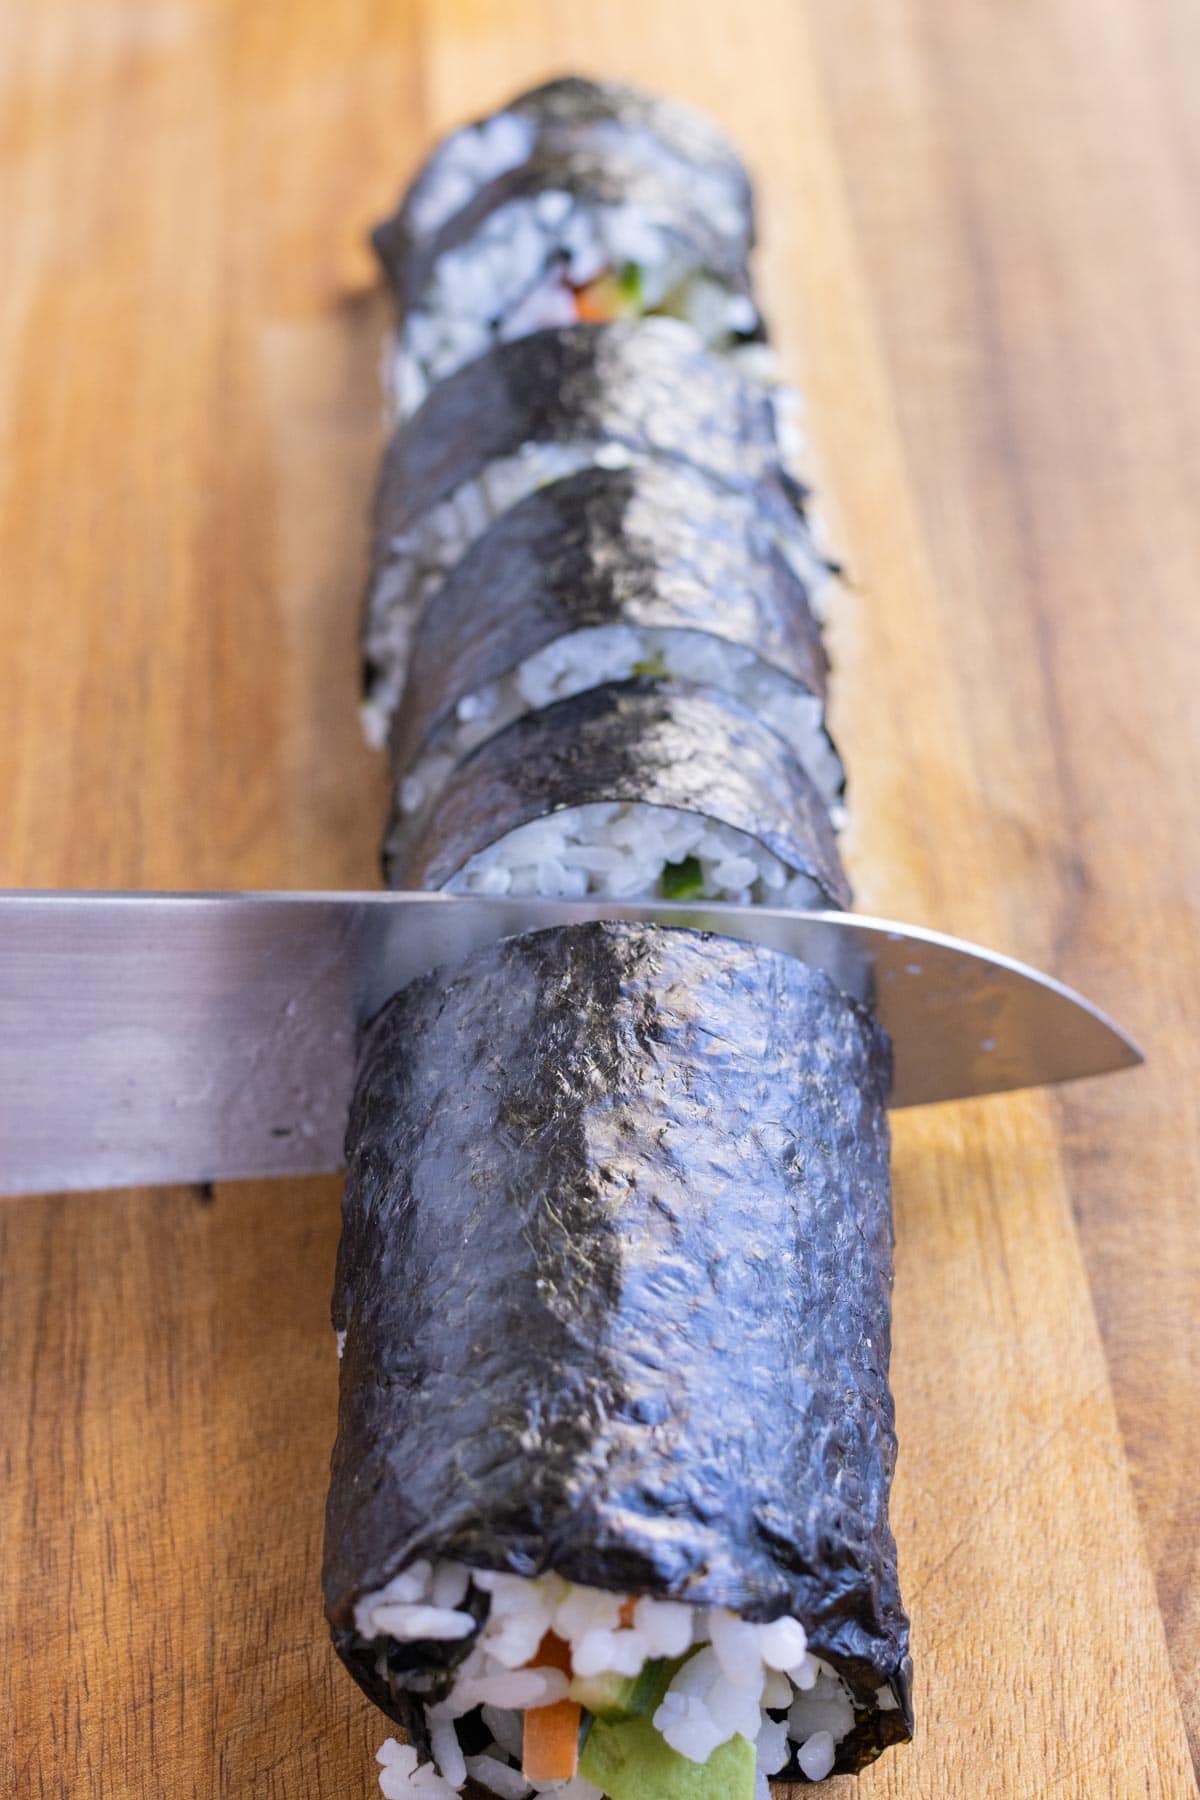 A sharp moist knife is used to cut the sushi roll.